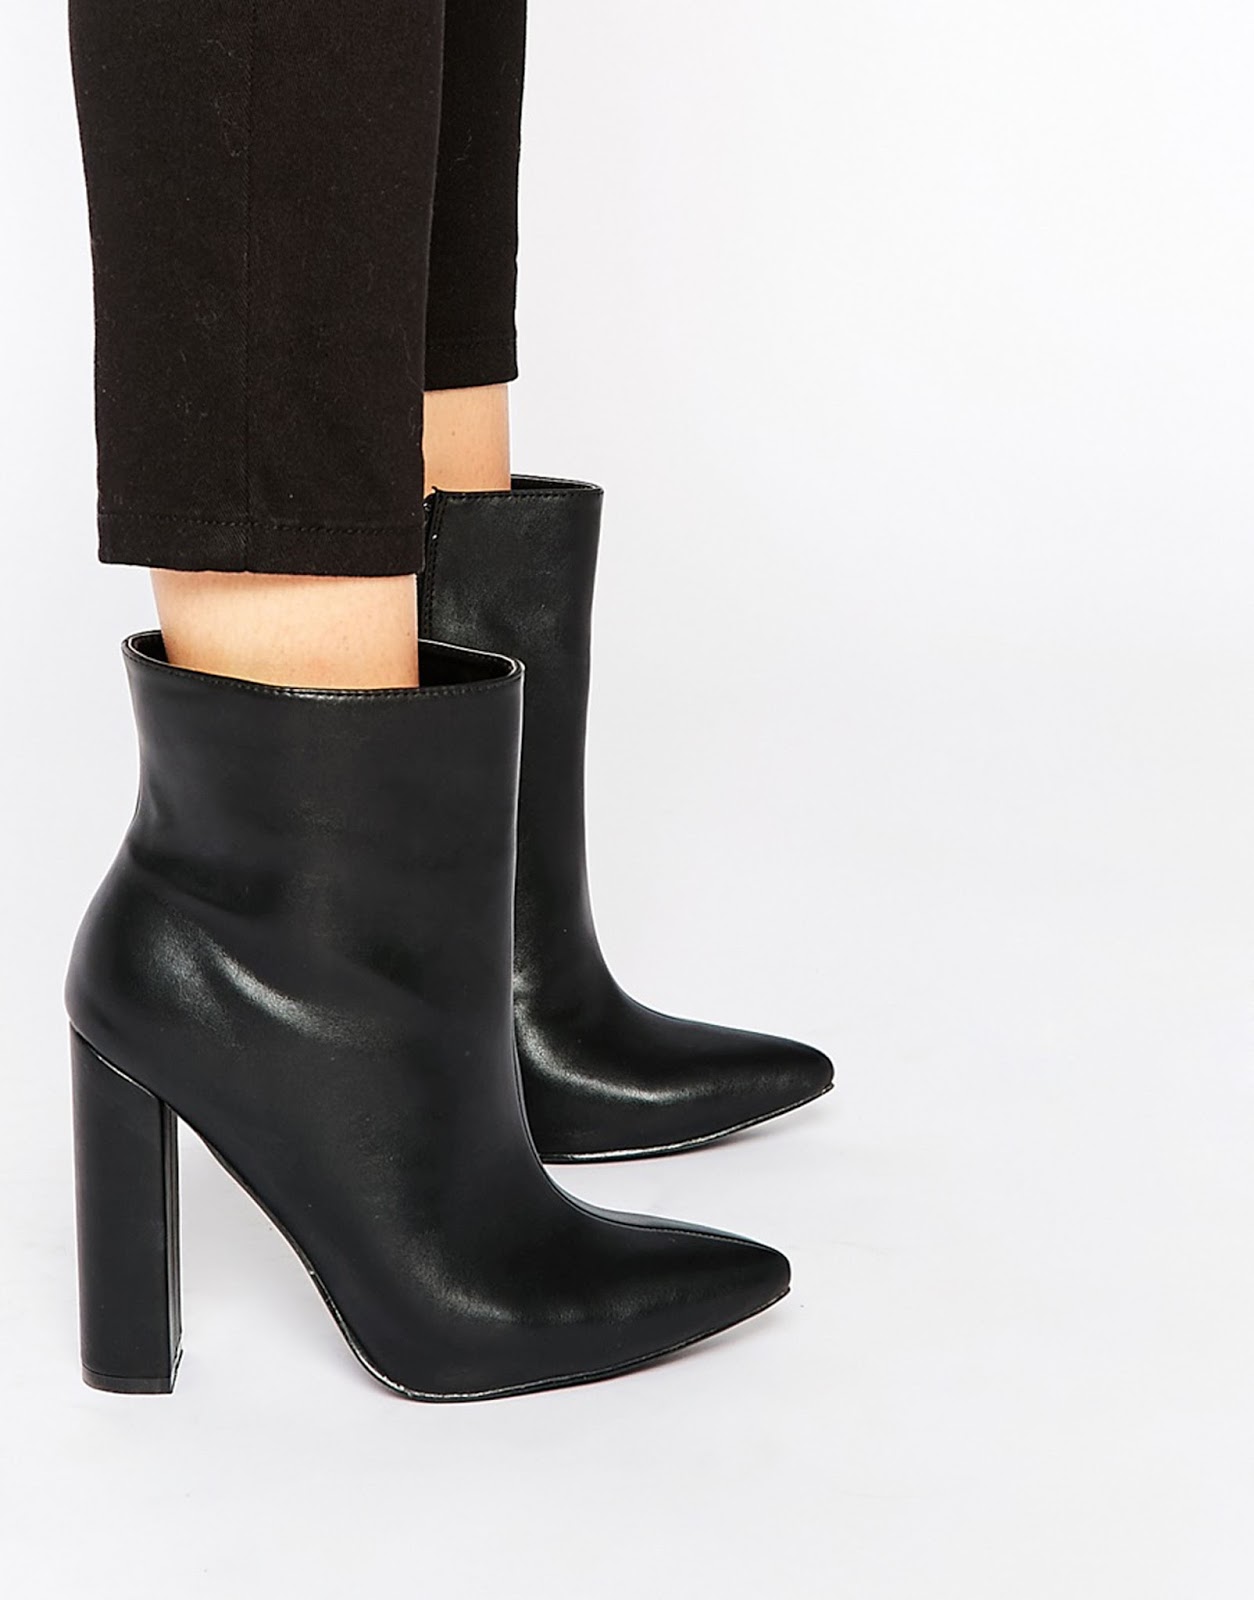 Eniwhere Fashion - Ankle Boots Mania